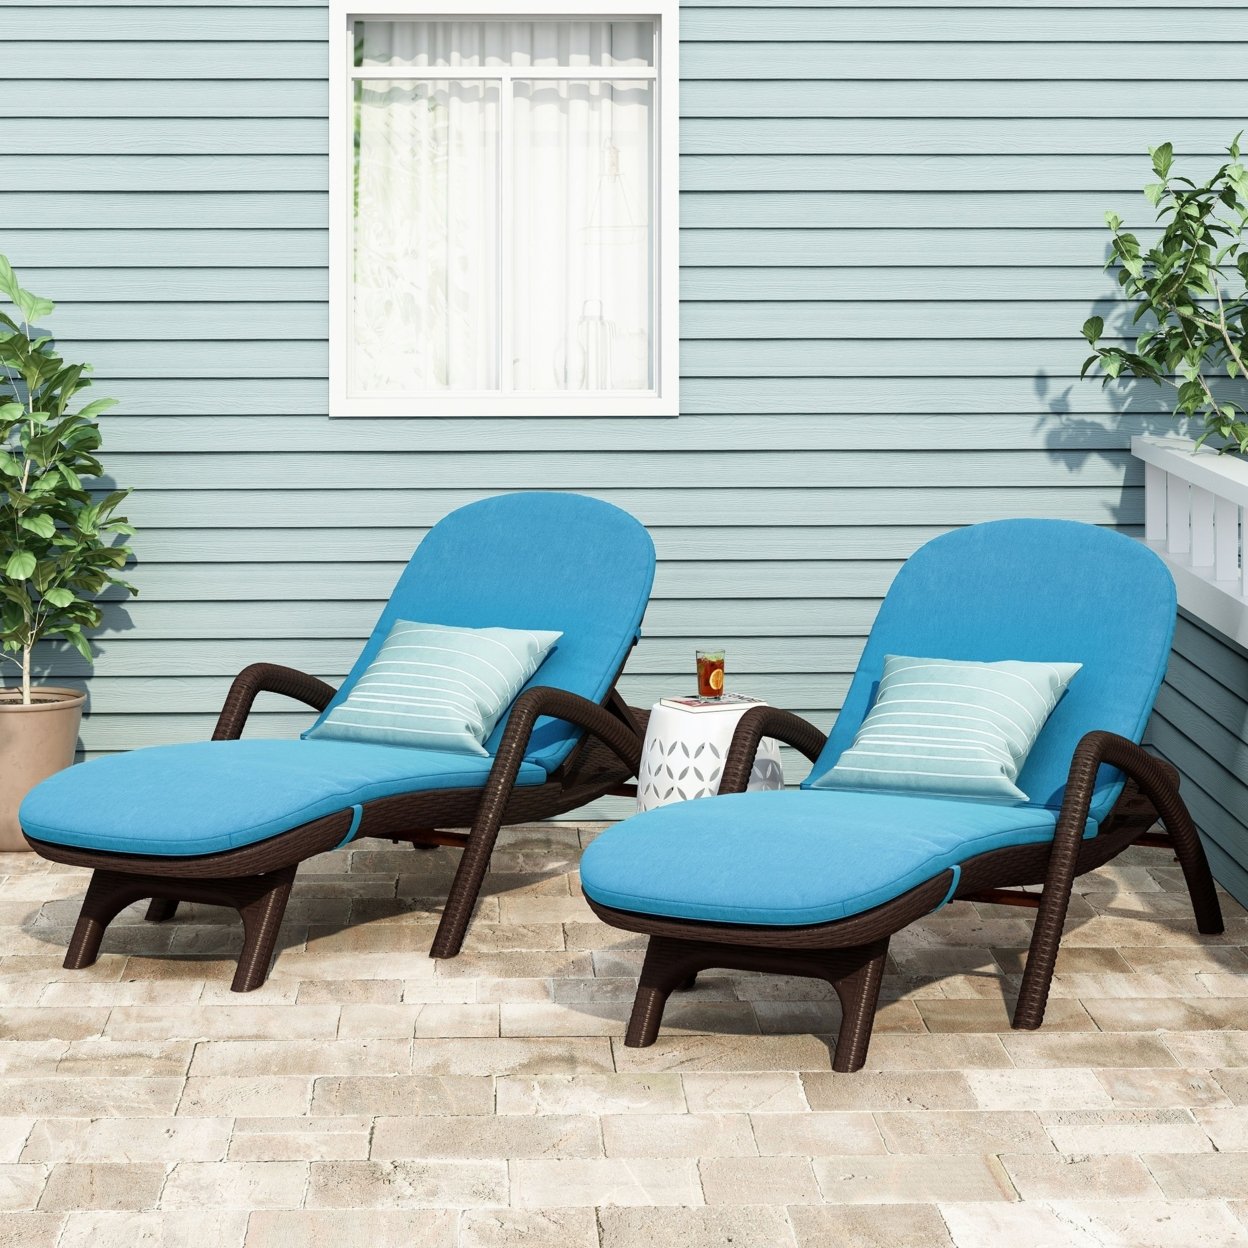 Riley Outdoor Faux Wicker Chaise Lounges With Cushion (Set Of 2) - Dark Brown/blue